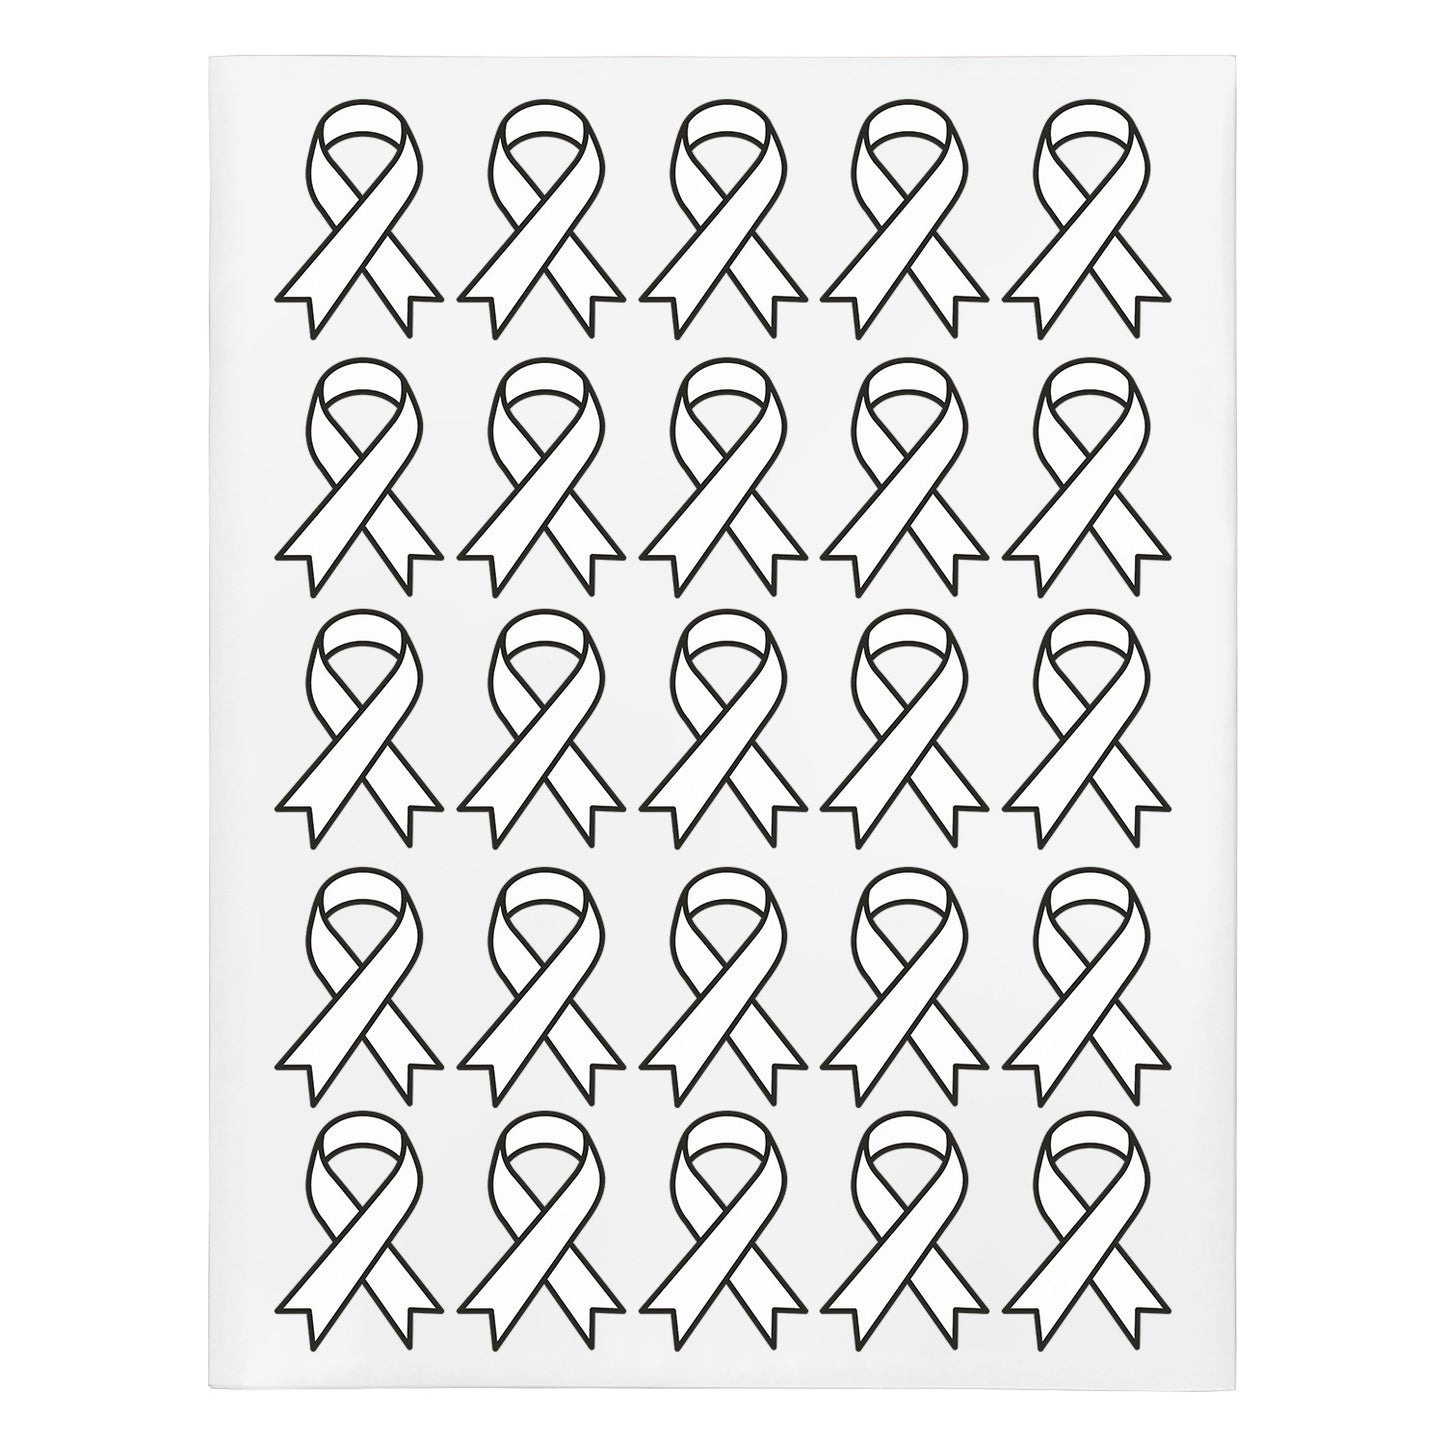 2.2 x 1.6 inch | Awareness: Lung Disease & Violence Against Women Awareness Ribbon Stickers